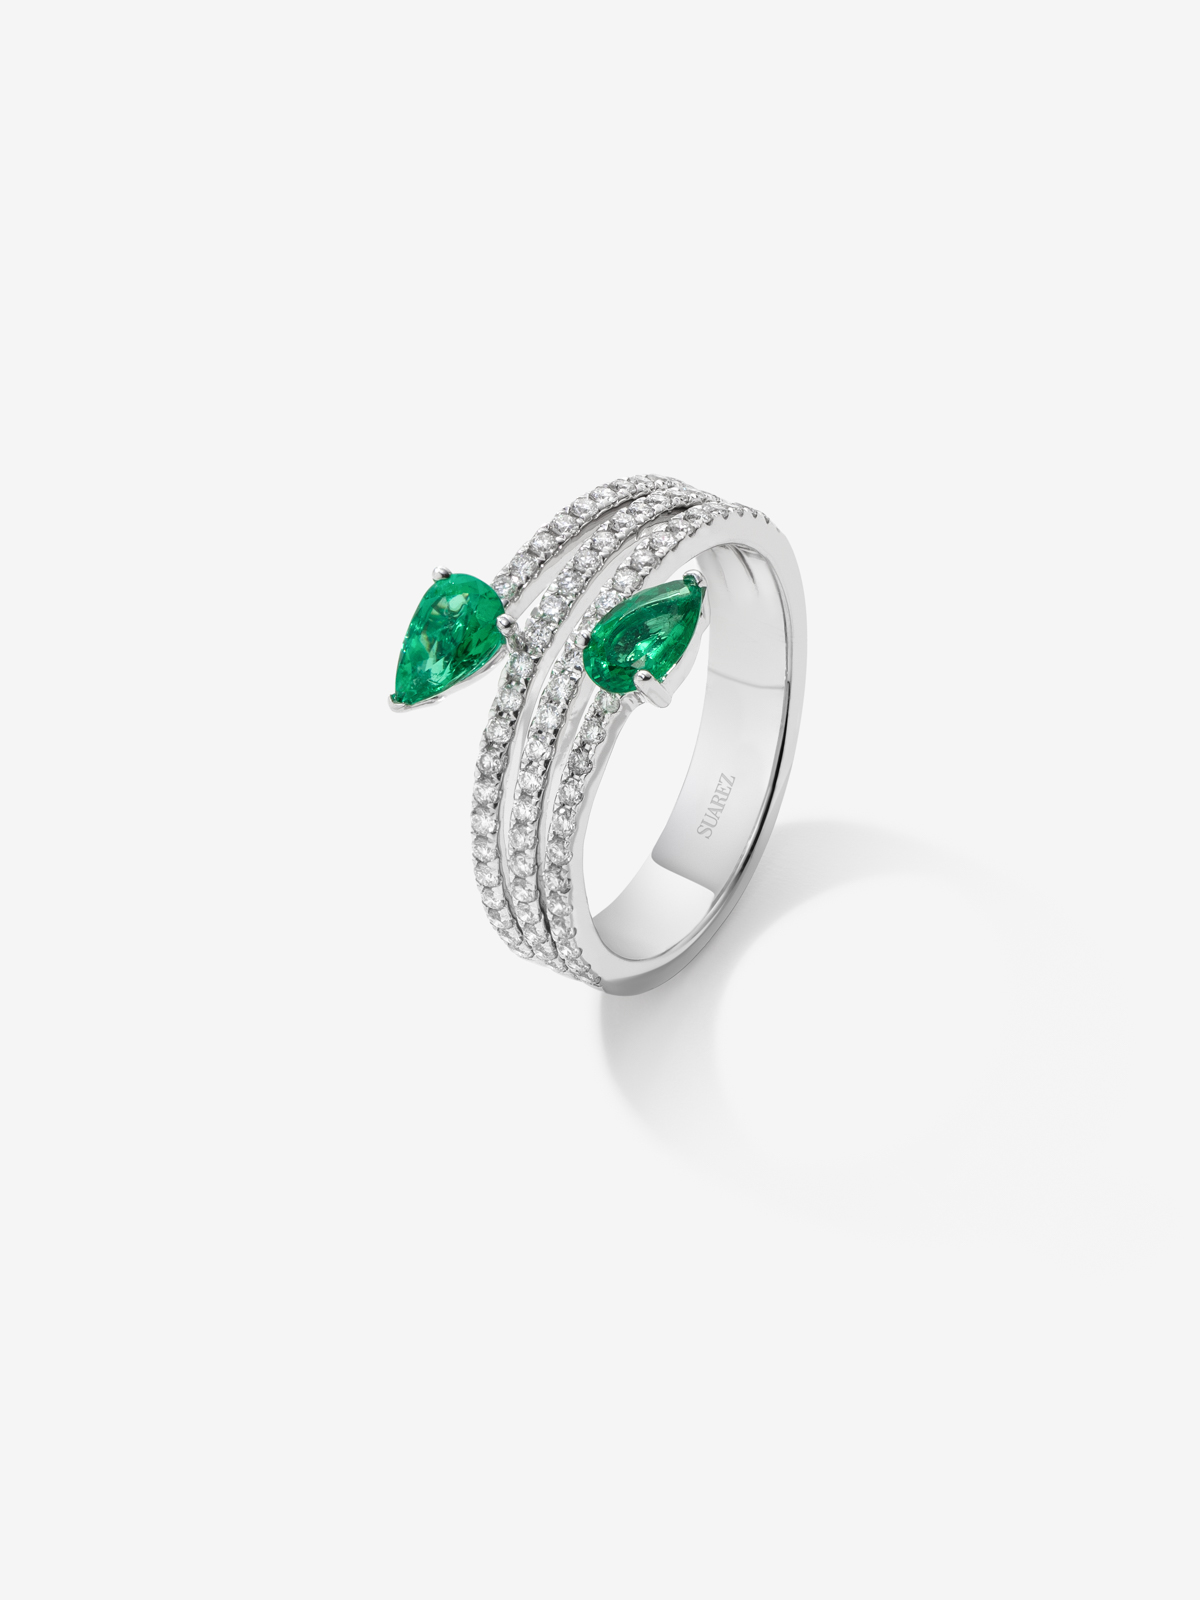 18k white gold ring with 0.61cts emerald and 1.51cts diamonds.